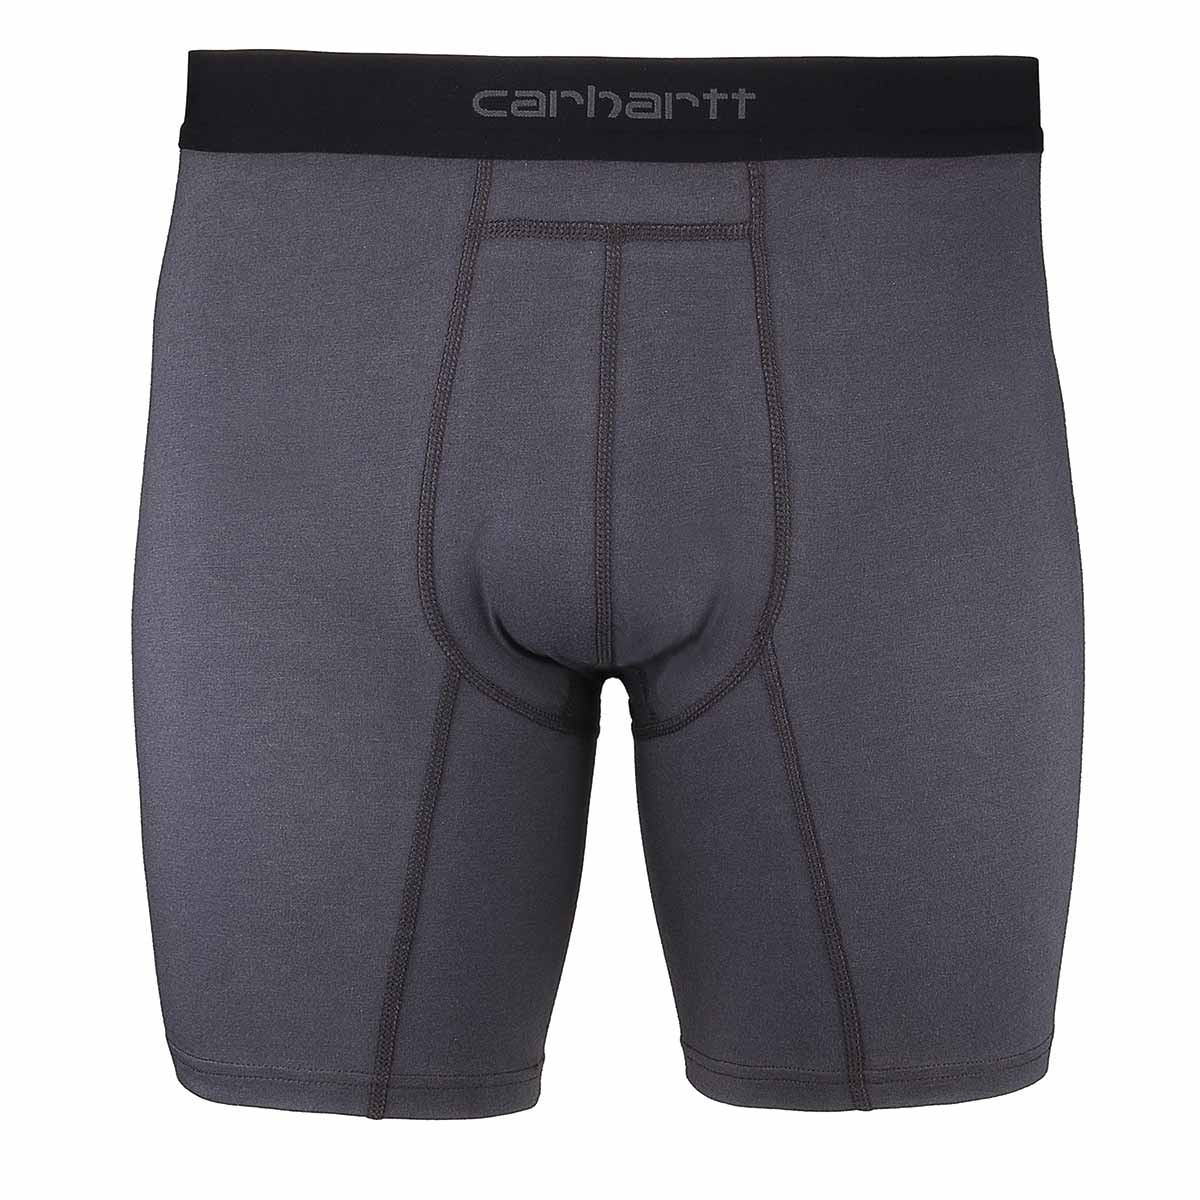 Carhartt 8 Inch Cotton Boxer Brief 2-Pack - S / Shadow